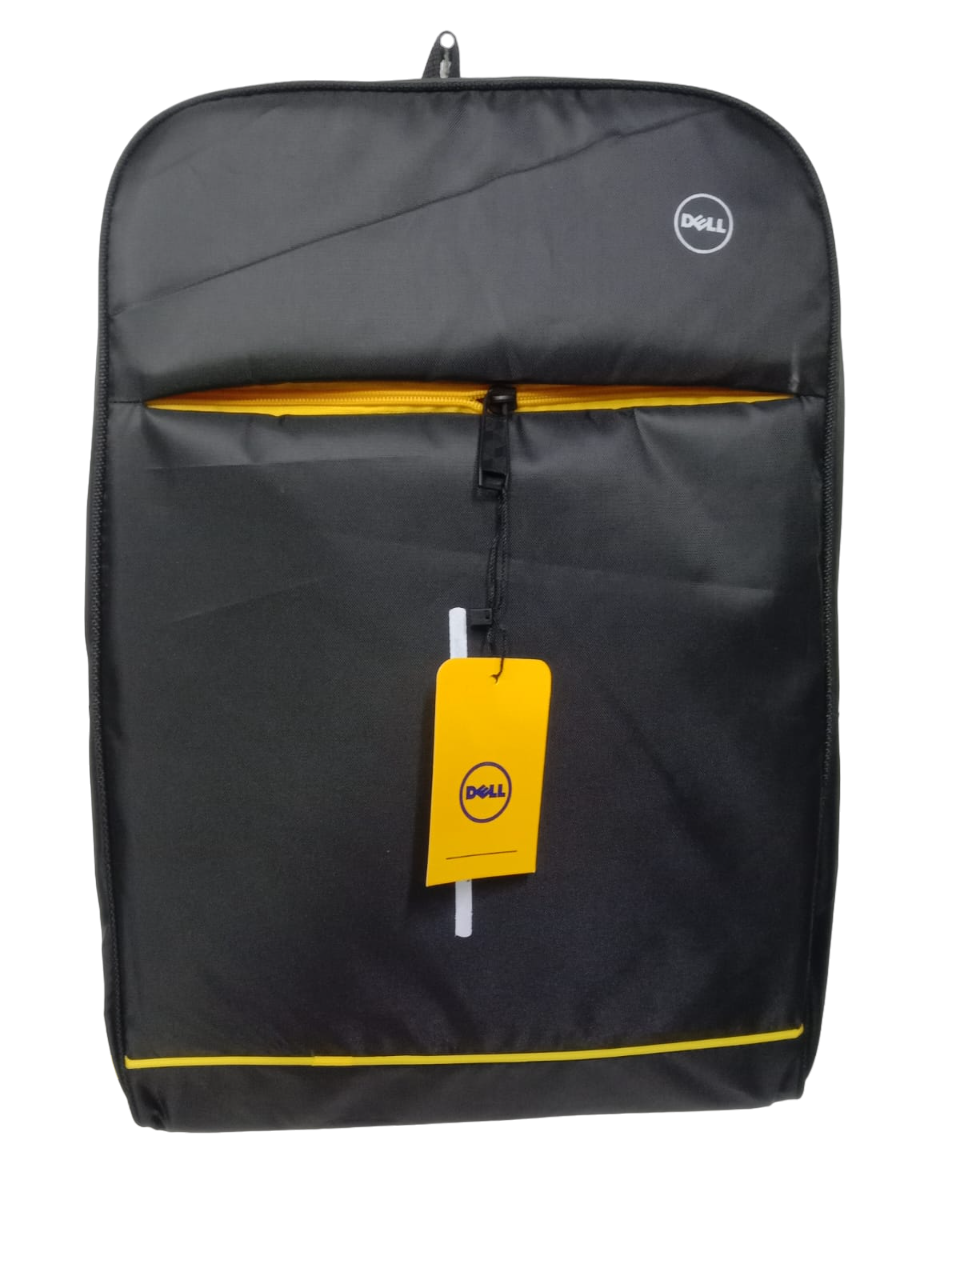 DELL Laptop Bag Pack In Black Parachute Fabric And Dark Yellow In Color And Comfortable